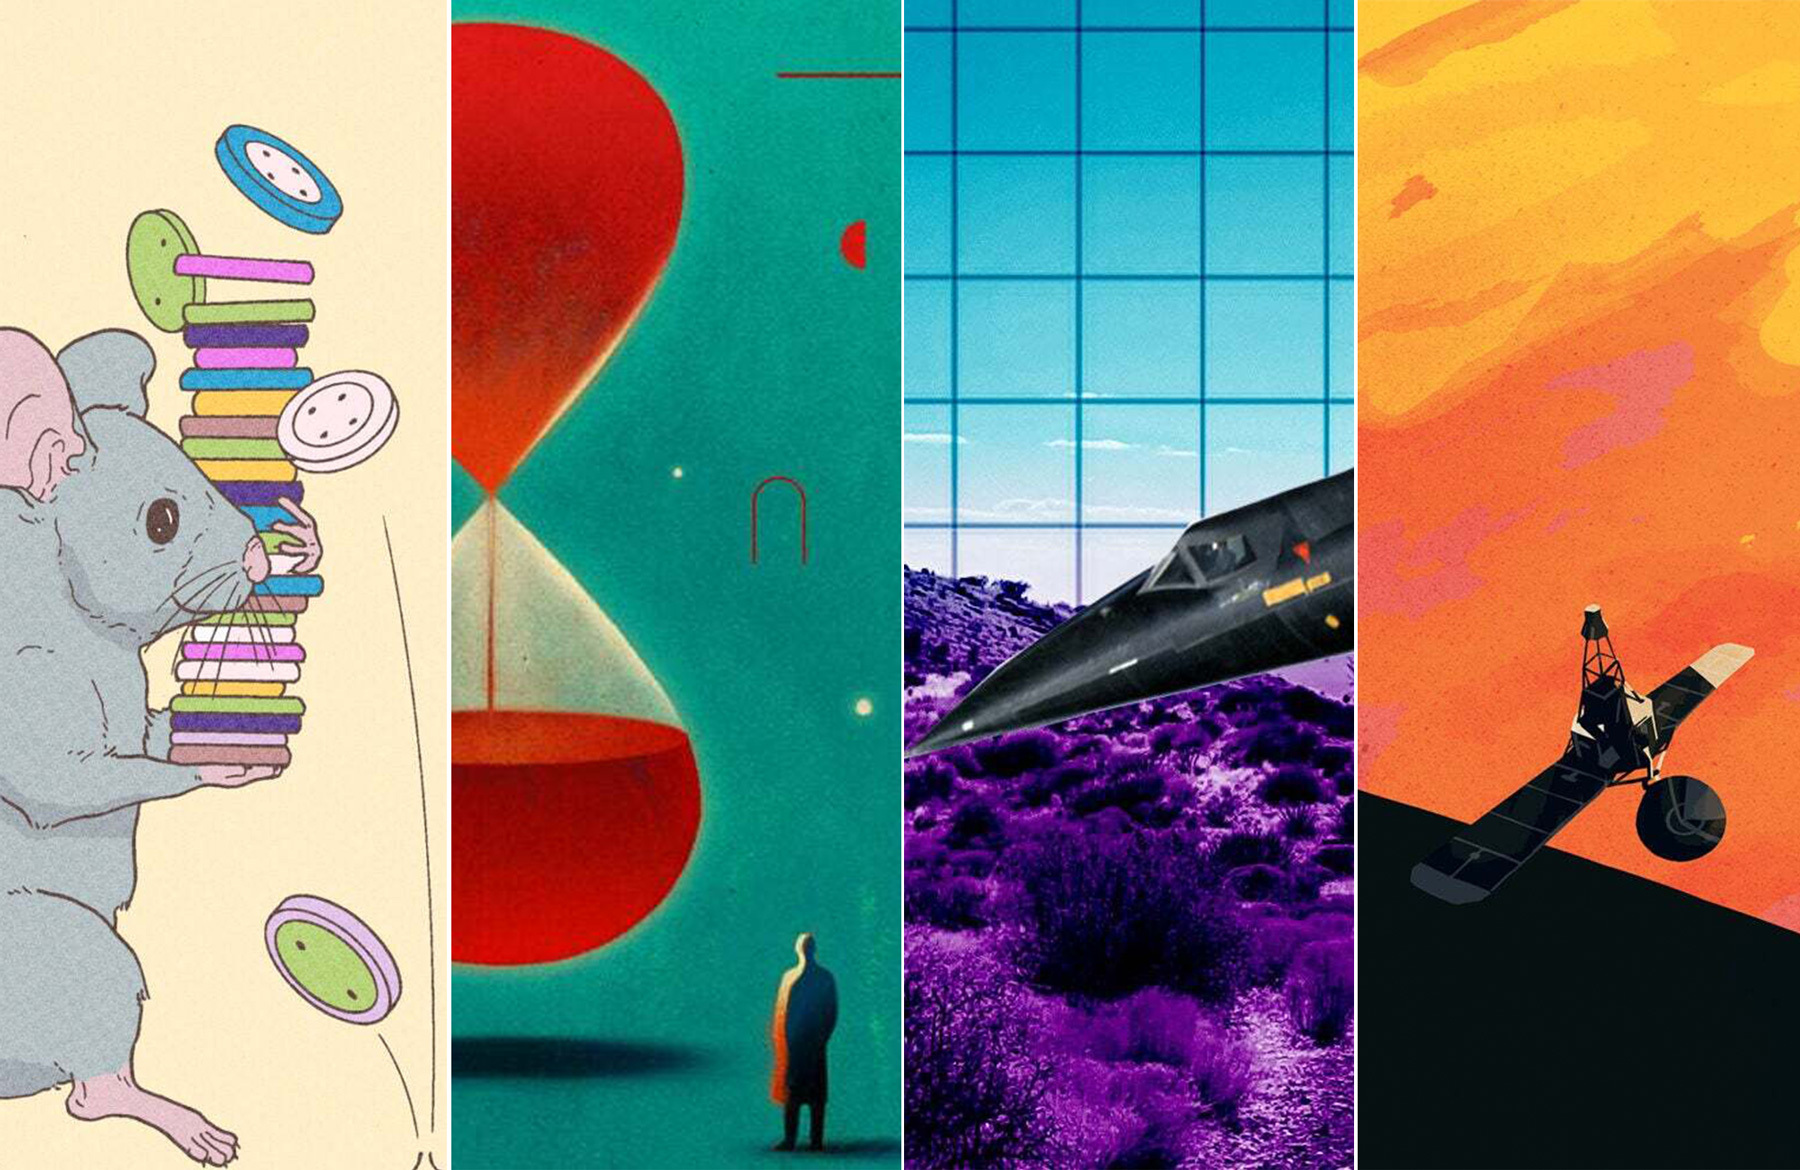 Our favorite science long reads of 2021